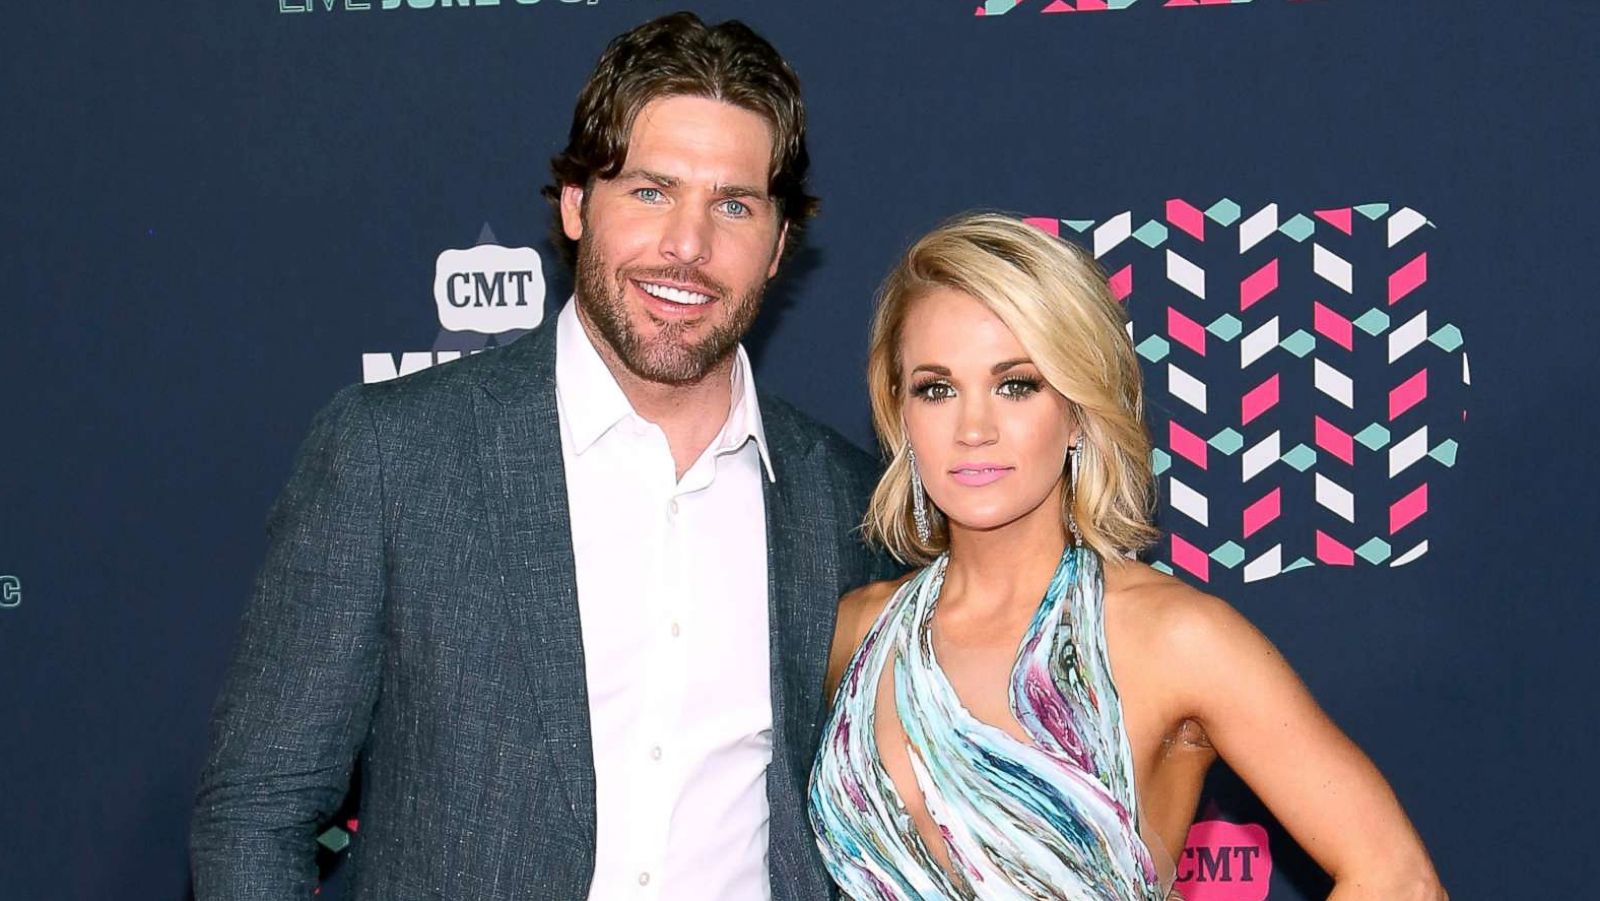 Carrie Underwood and Mike Fisher celebrate 11 years of marriage